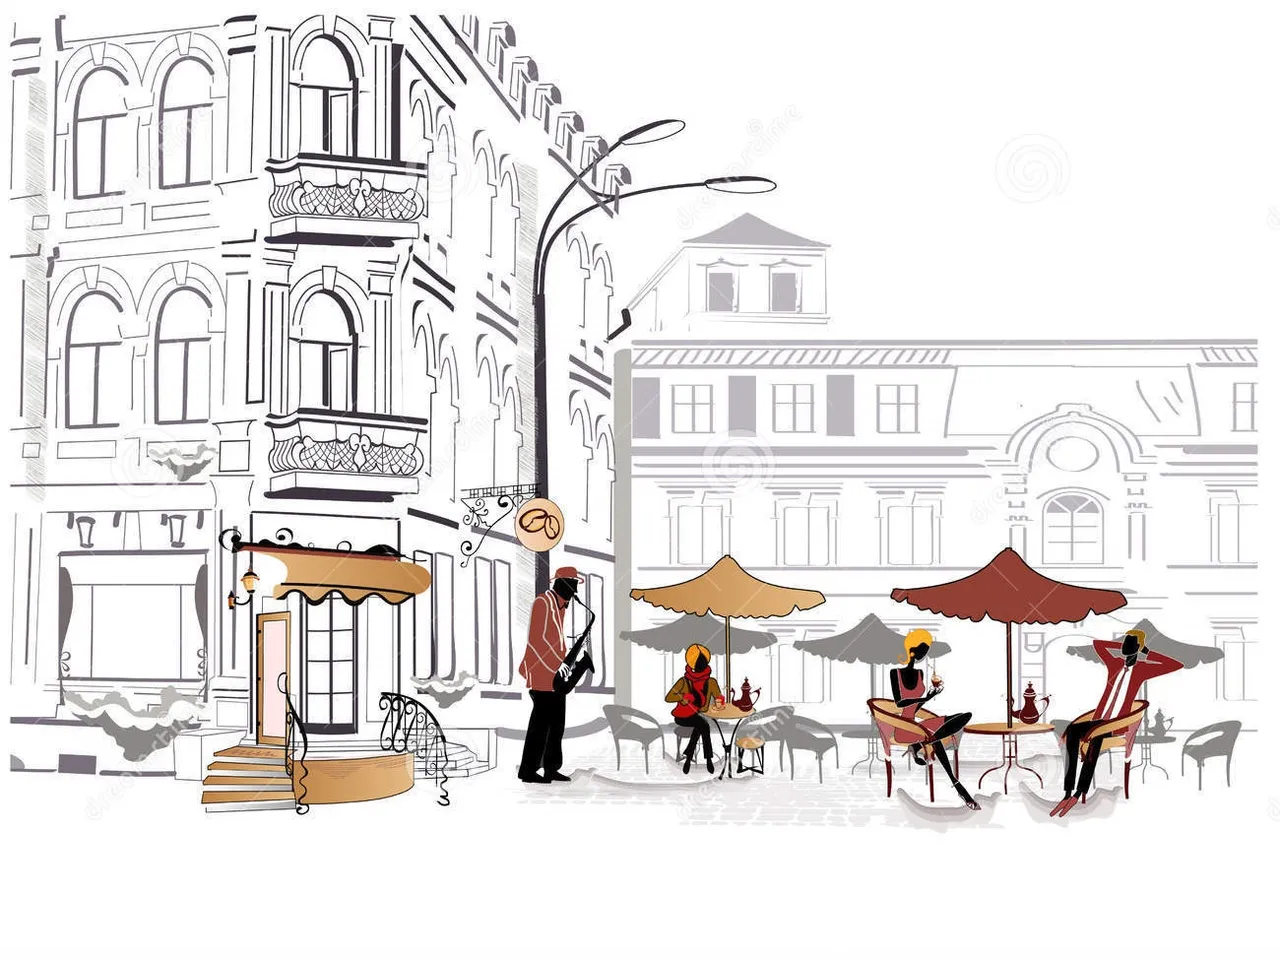 series_sketches_streets_cafe_21132970.jpg